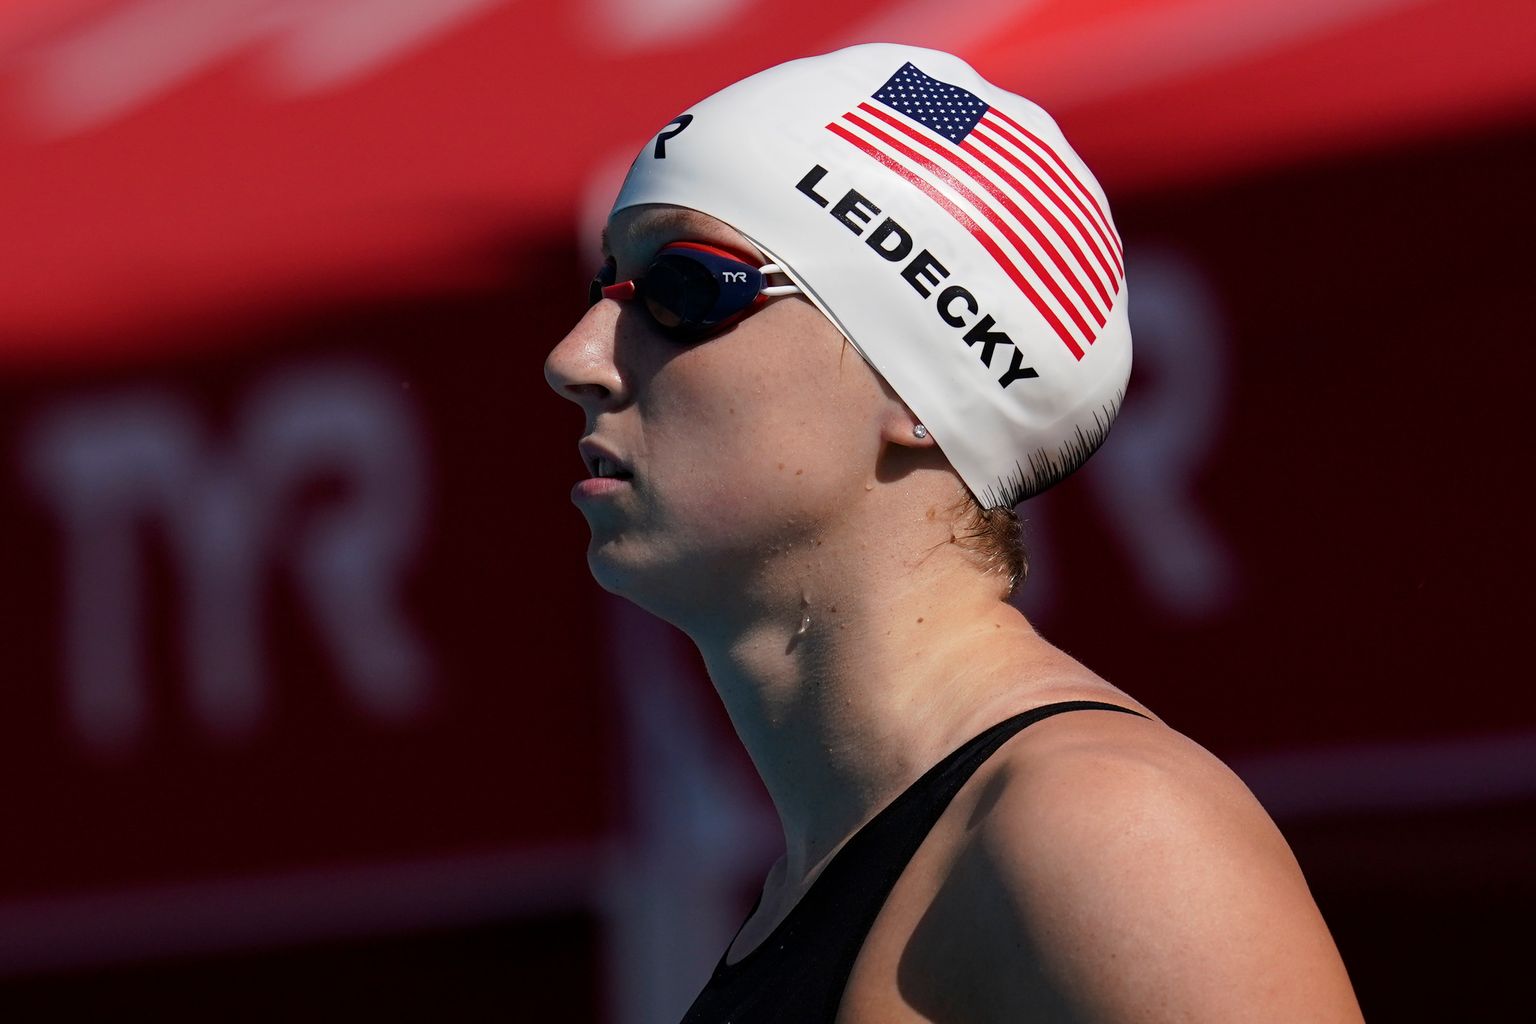 Katie Ledecky wins 200 free with world’s fastest time The Seattle Times